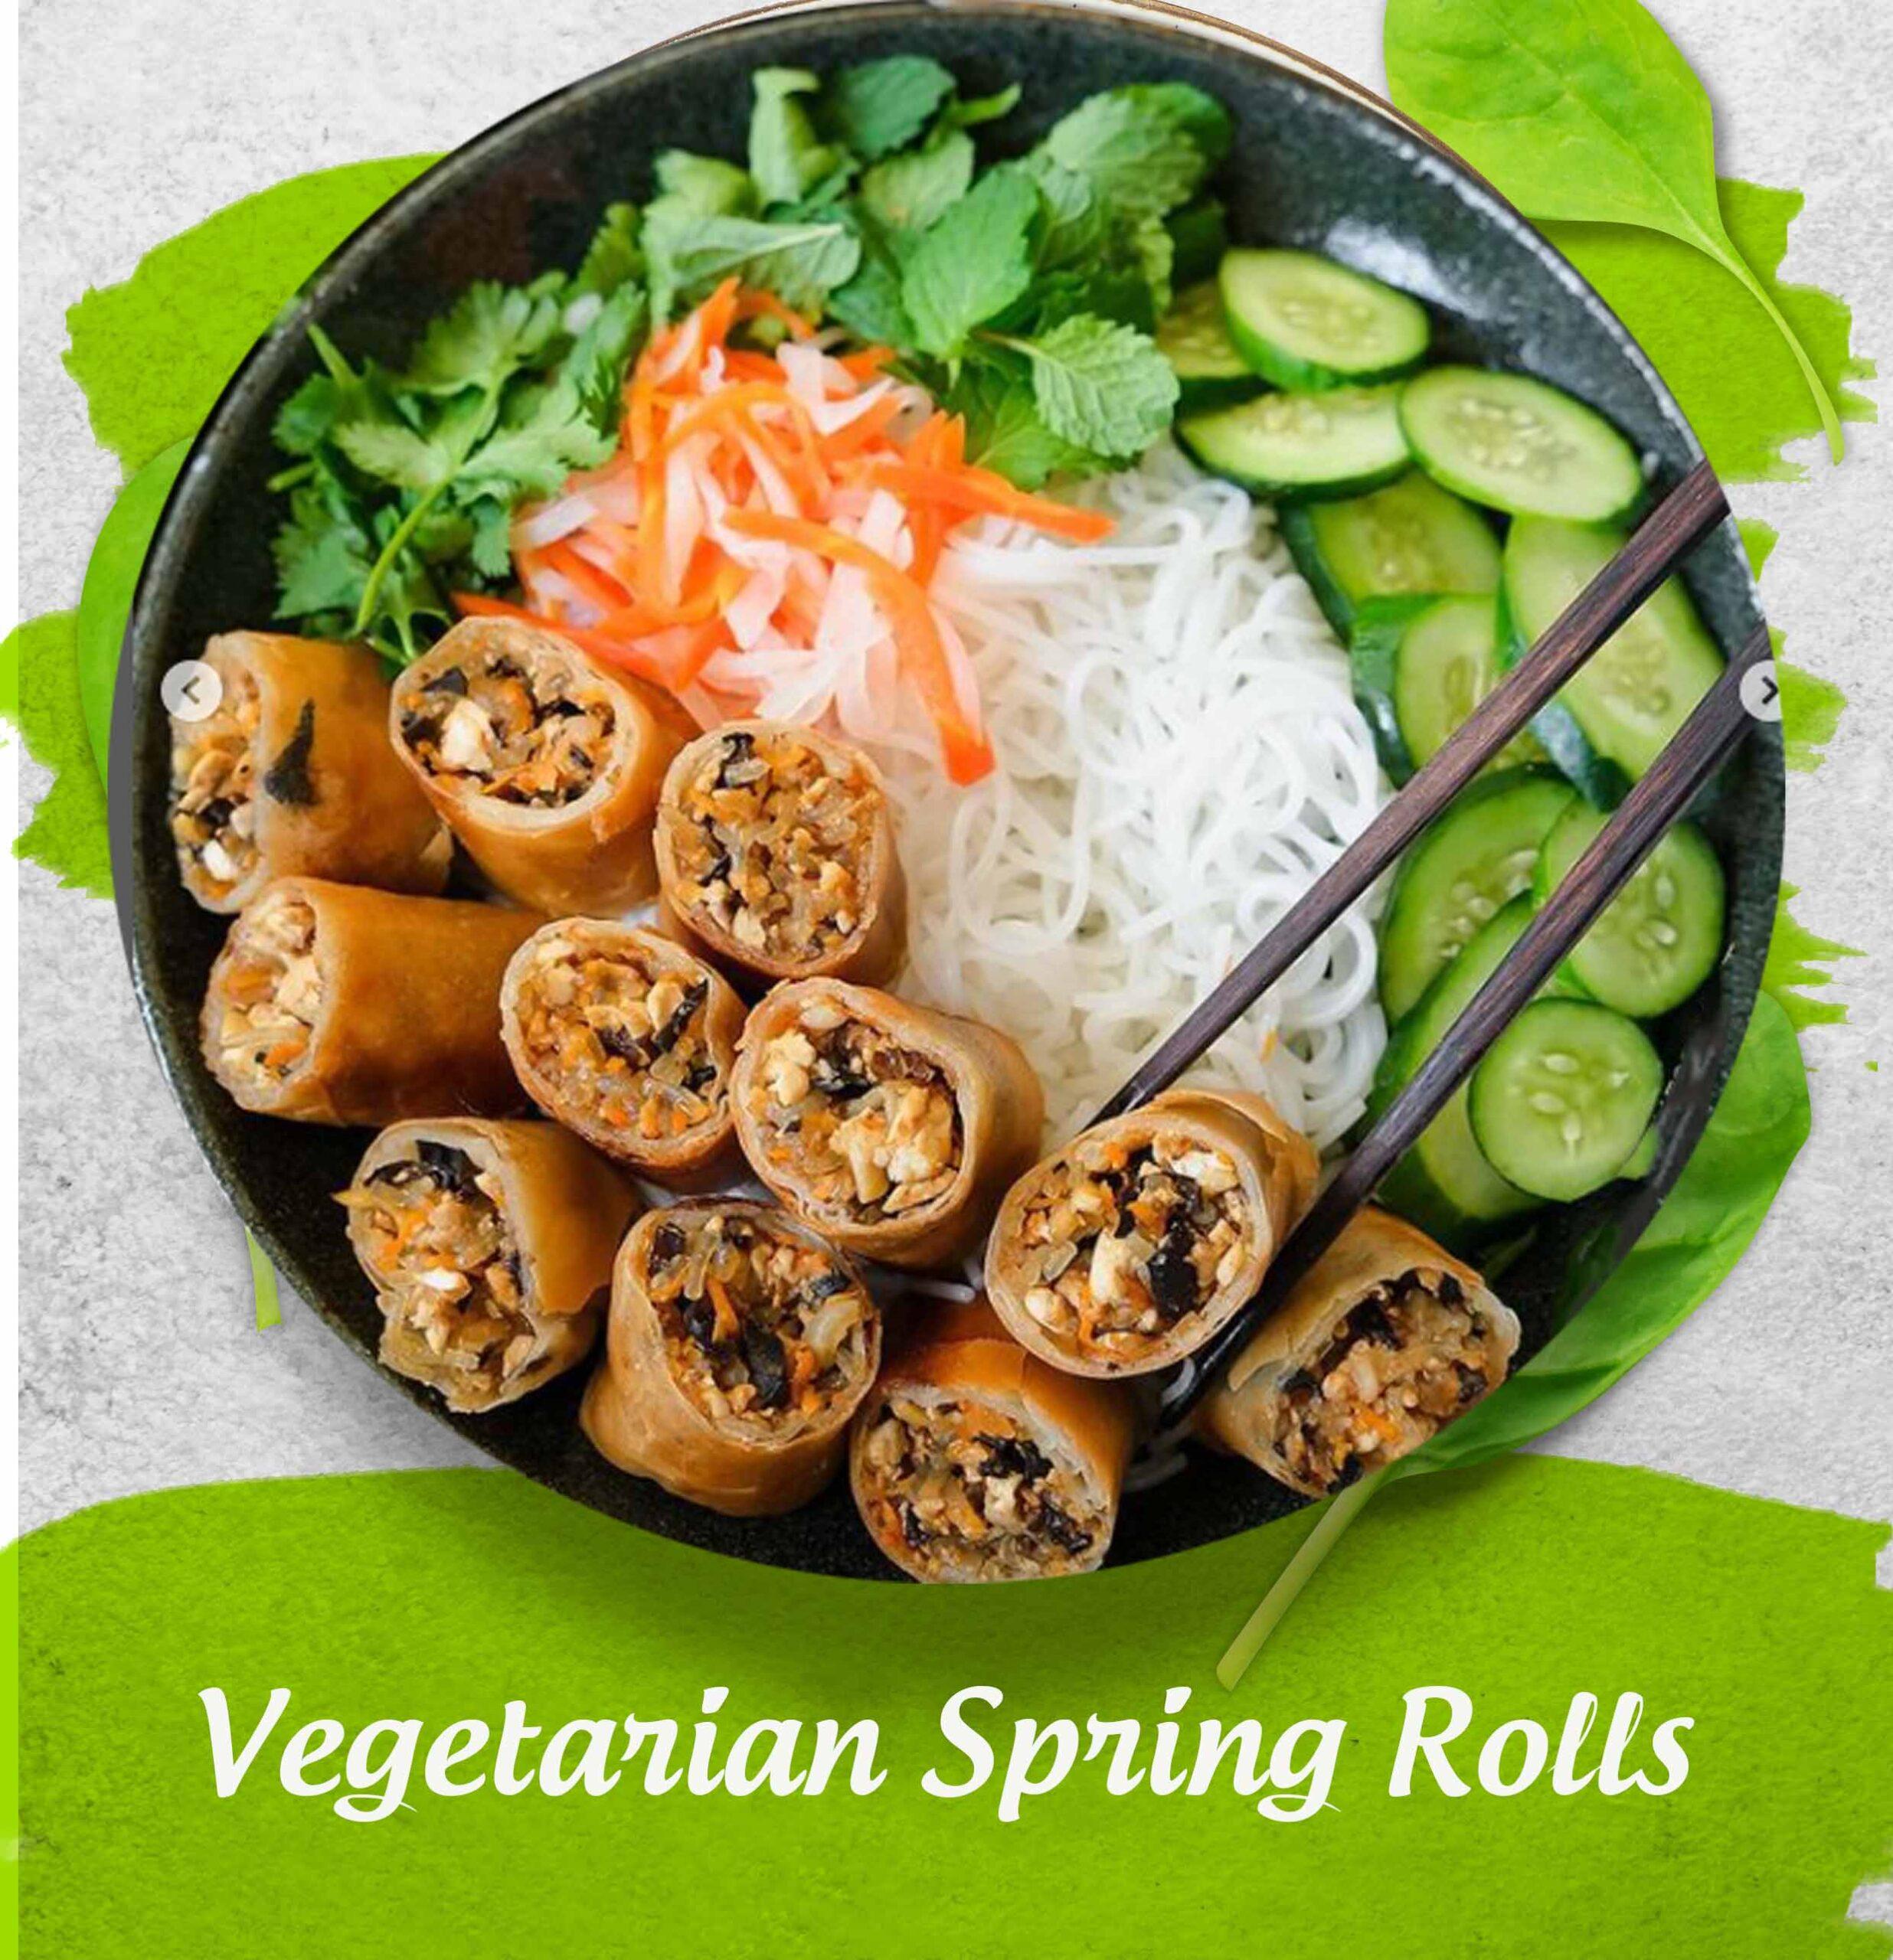 Vegetarian Spring Rolls - A Delectable Plant-Based Dish from Vietnam